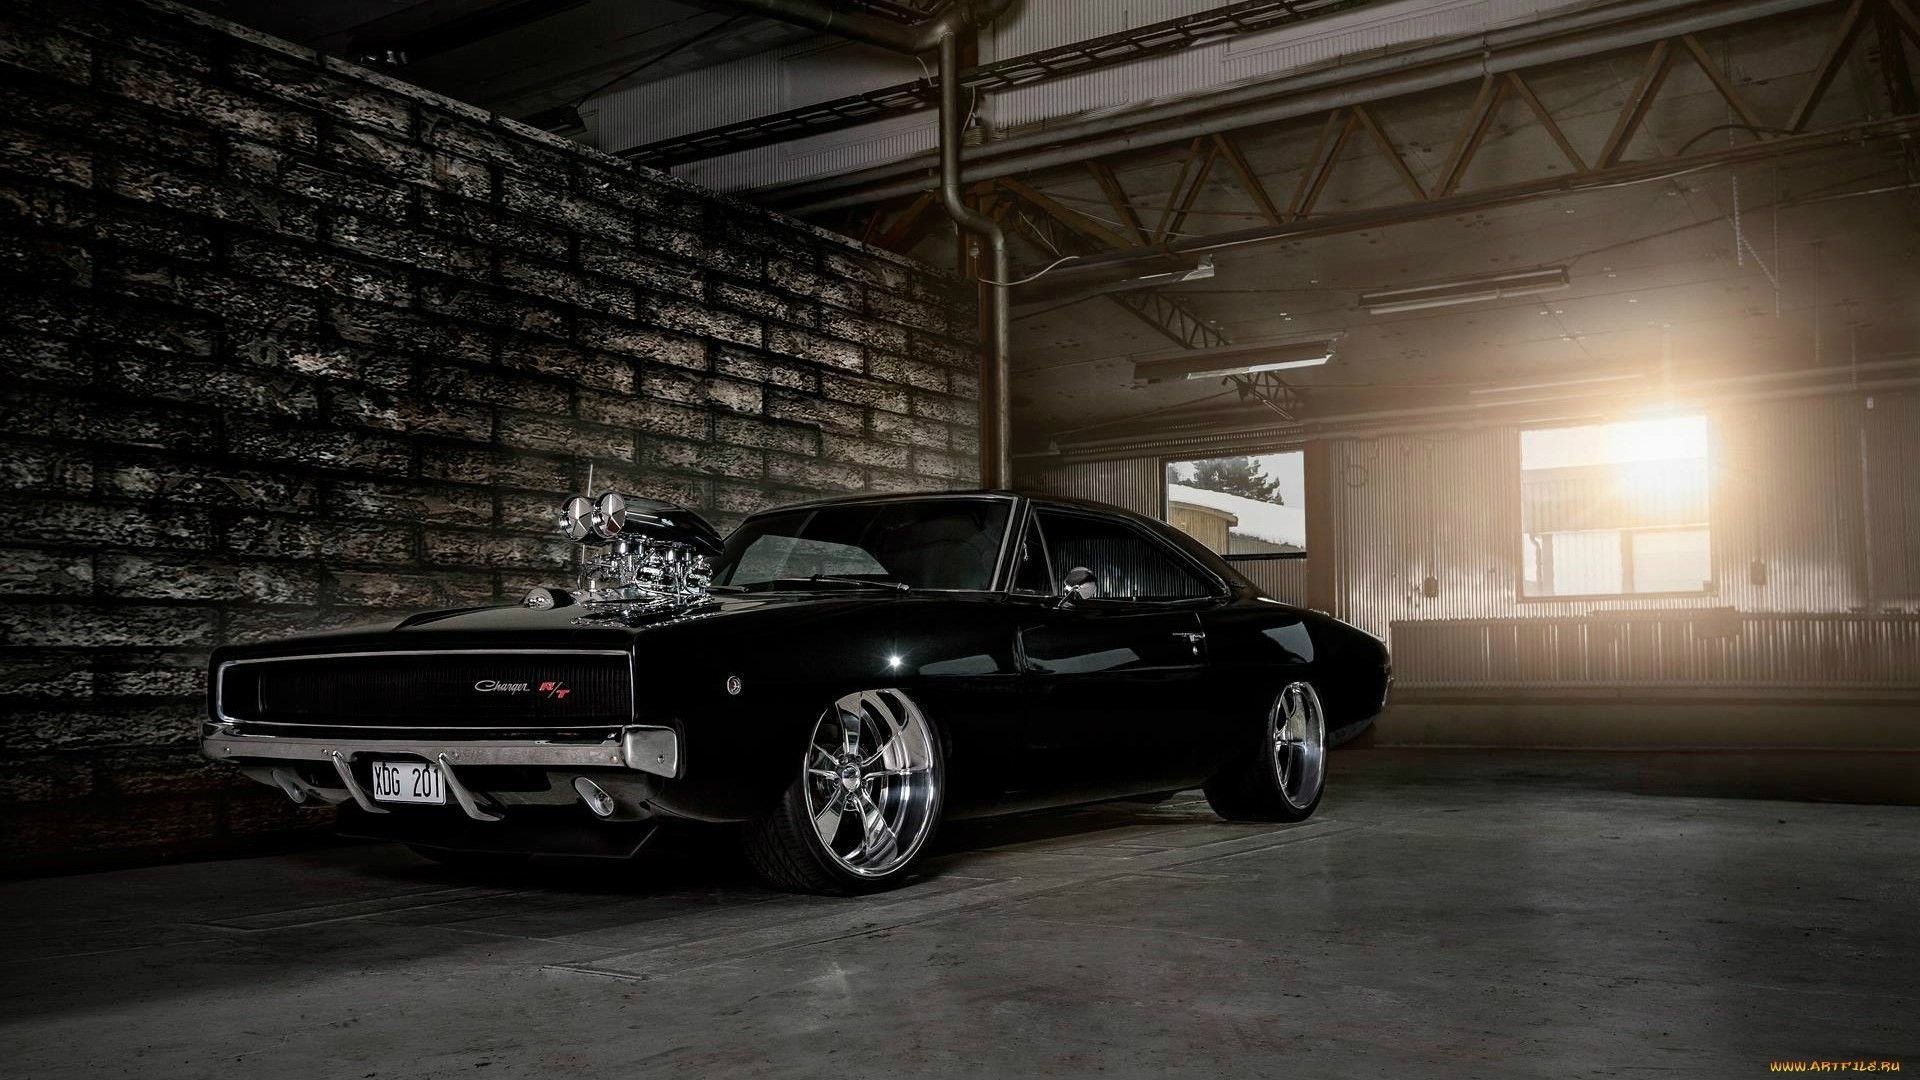 1970 Dodge Charger Wallpaper the best 64 images in 2018